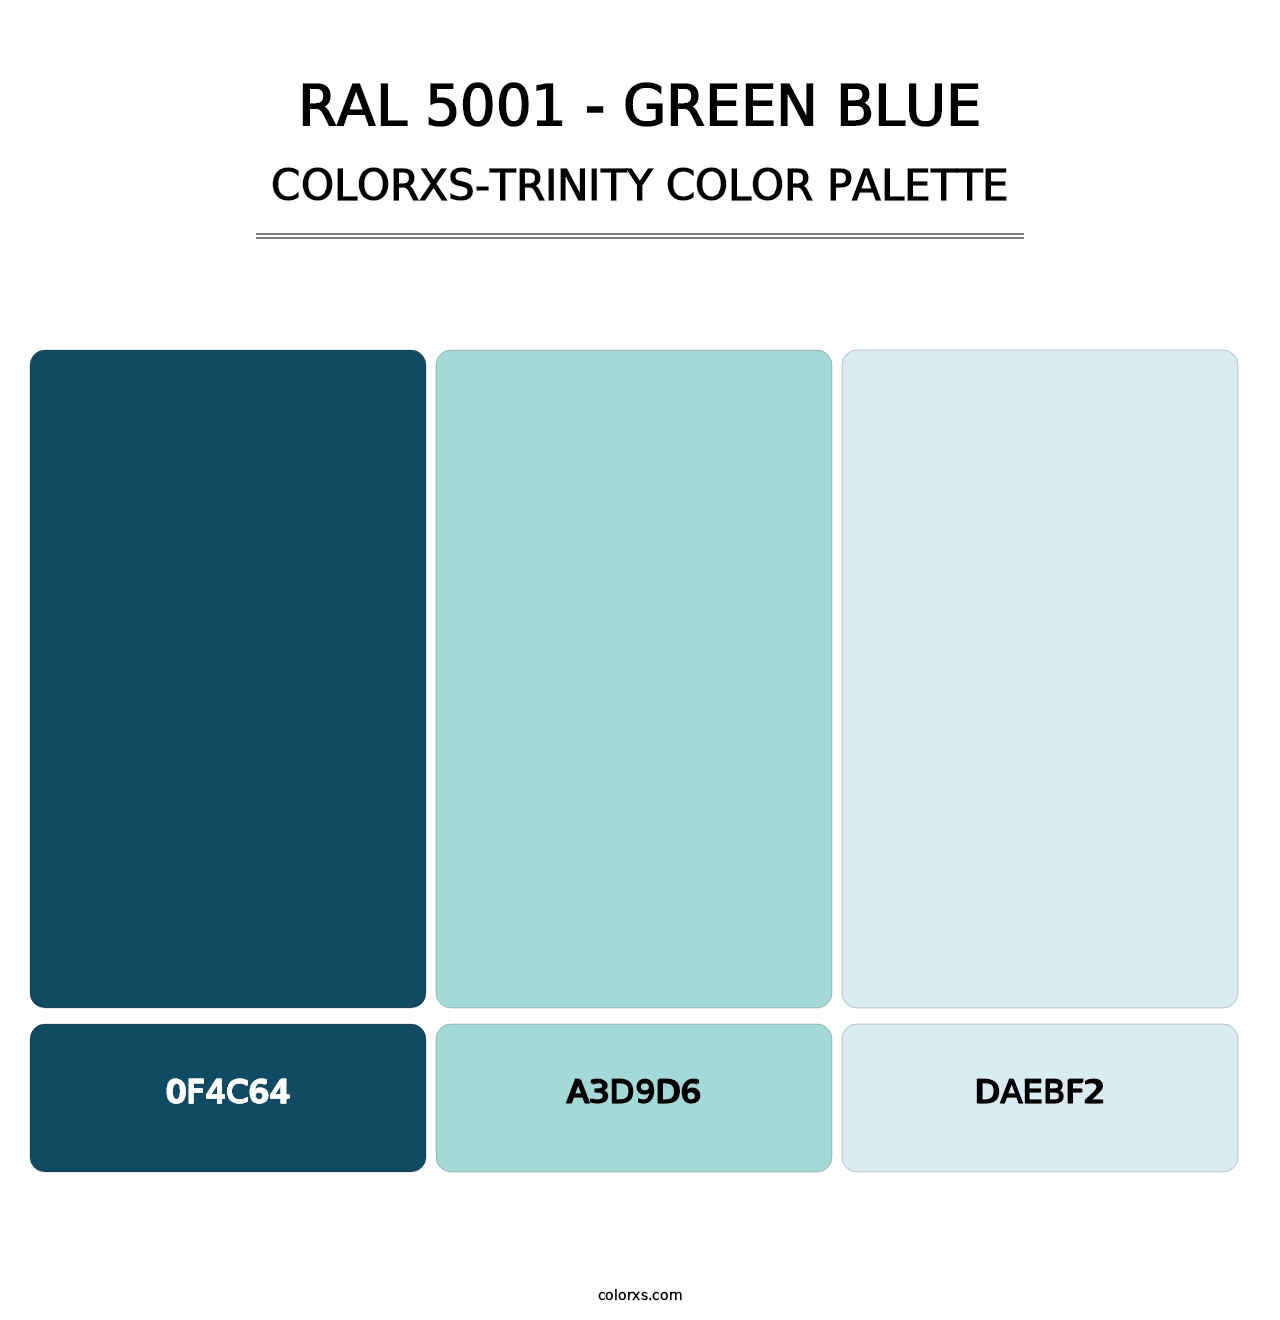 RAL 5001 - Green Blue - Colorxs Trinity Palette